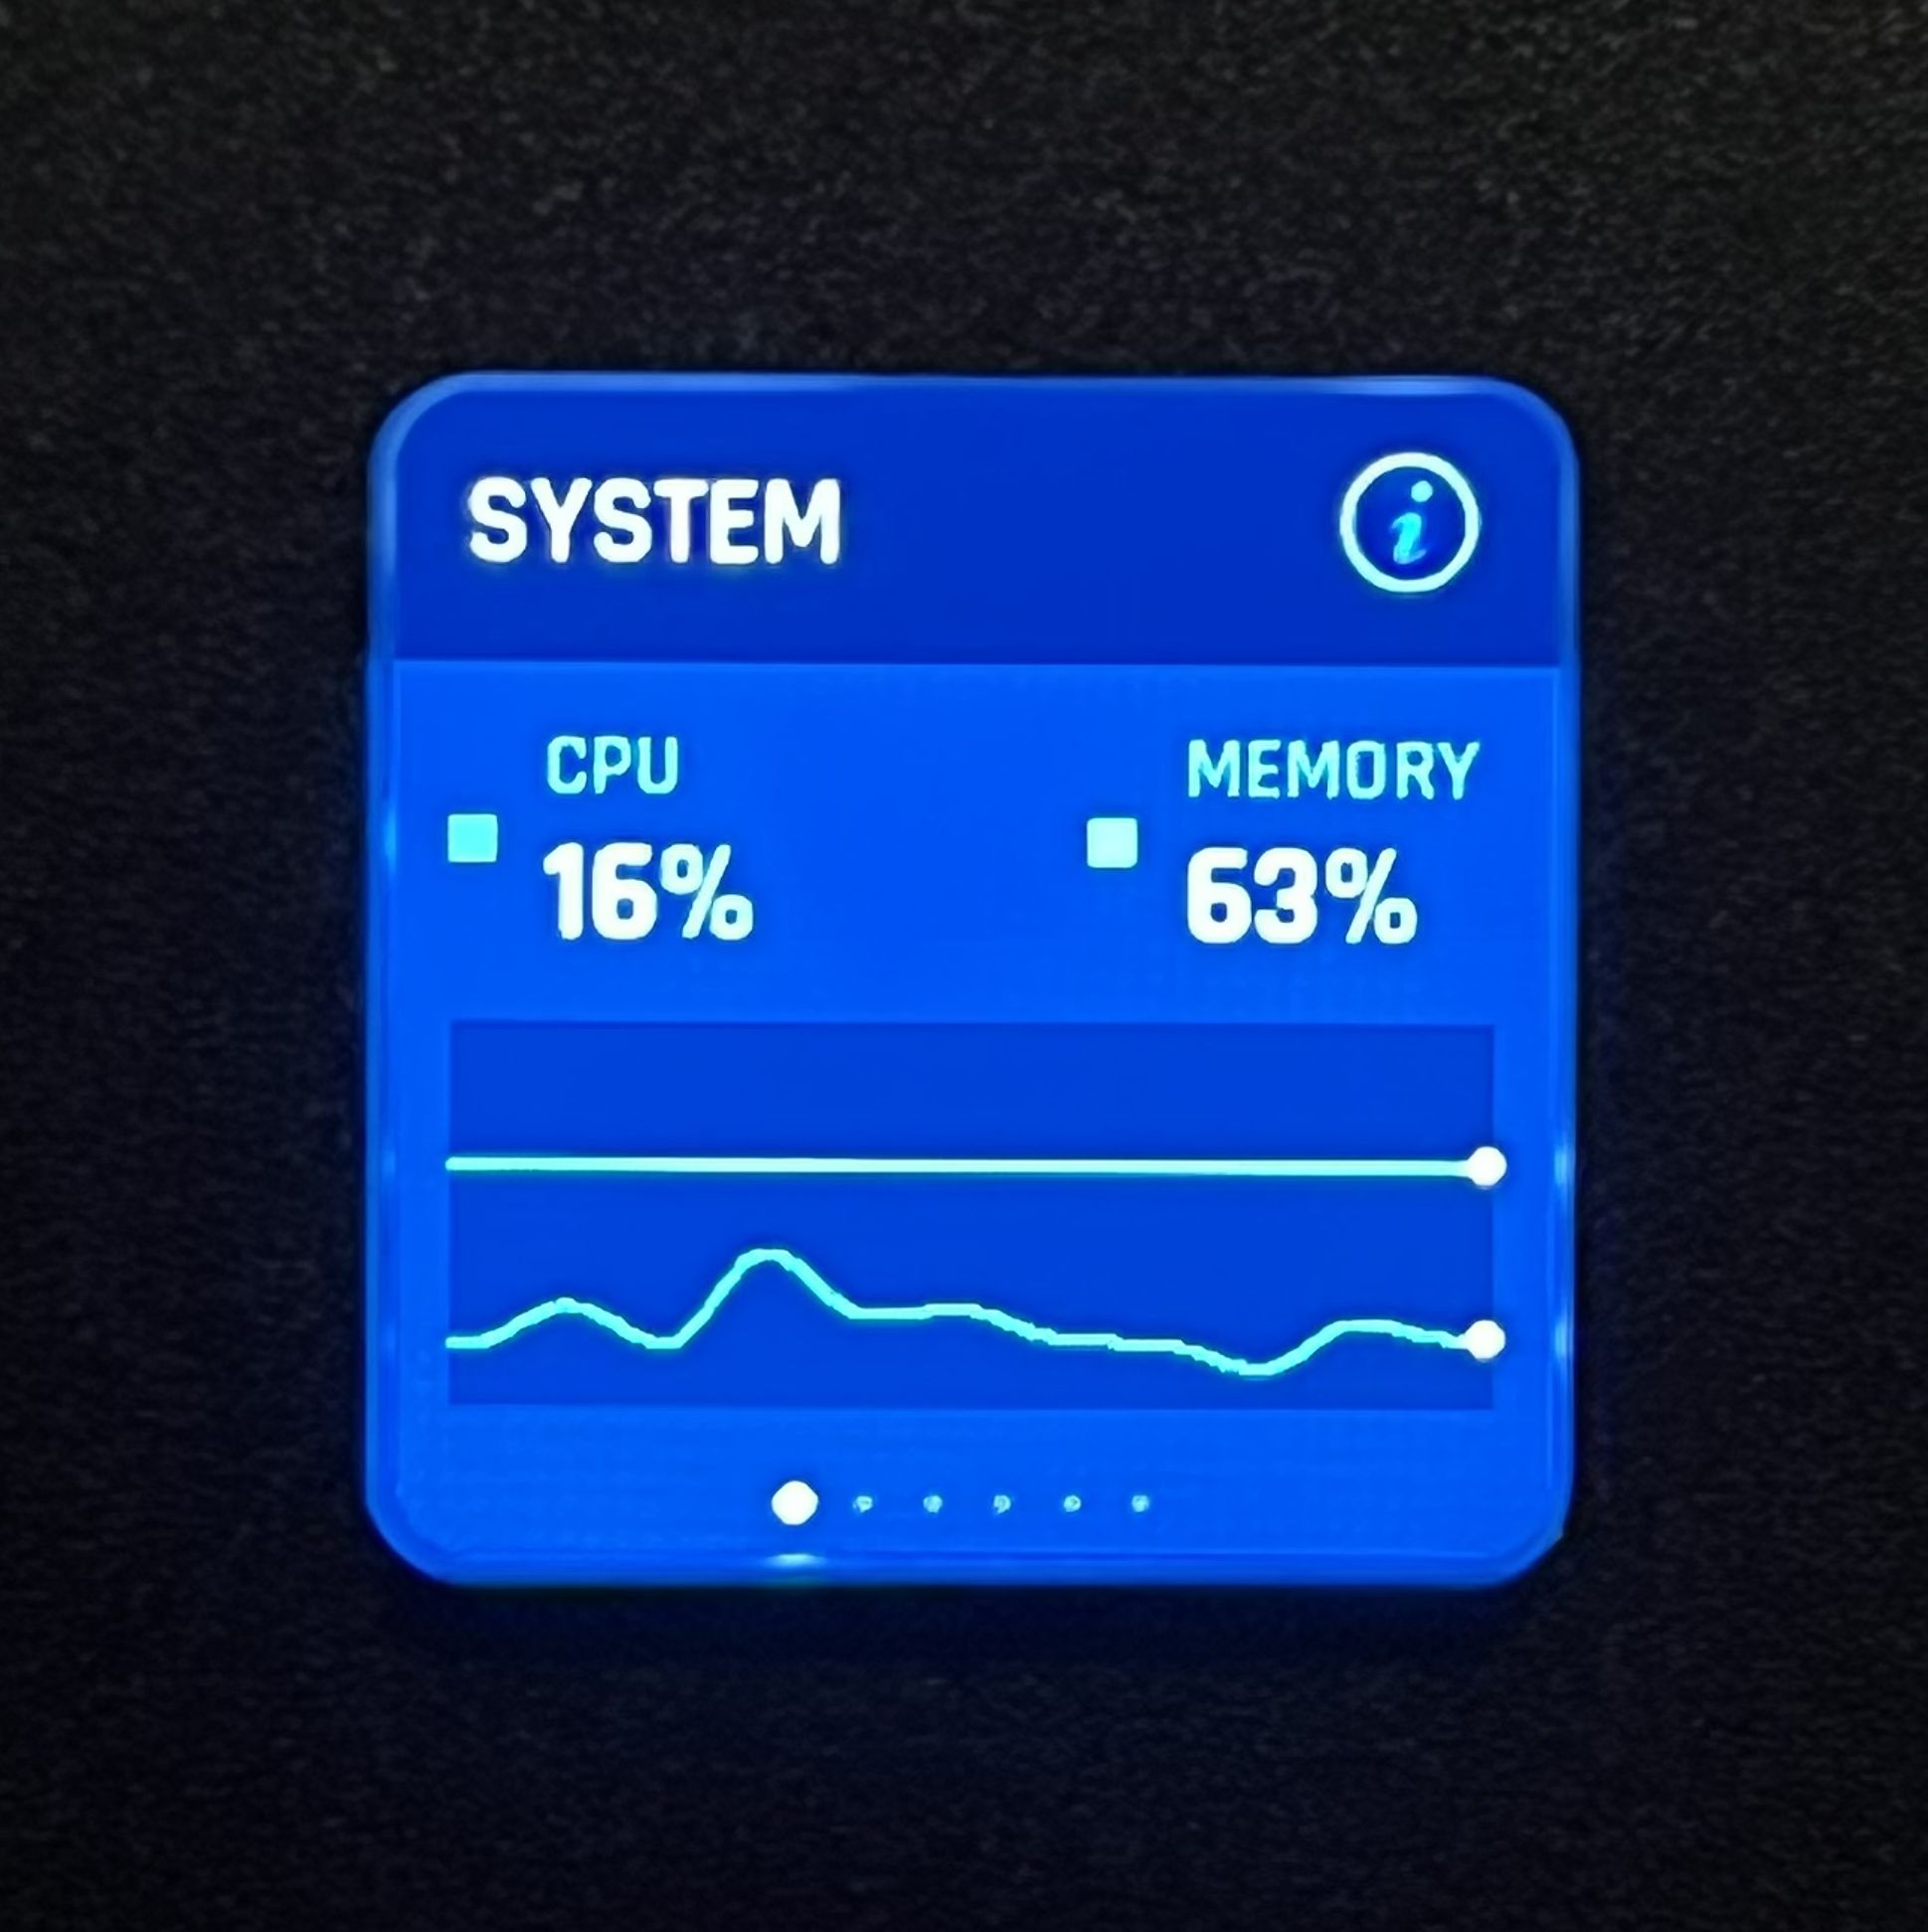 Dream Wall showing CPU load on display